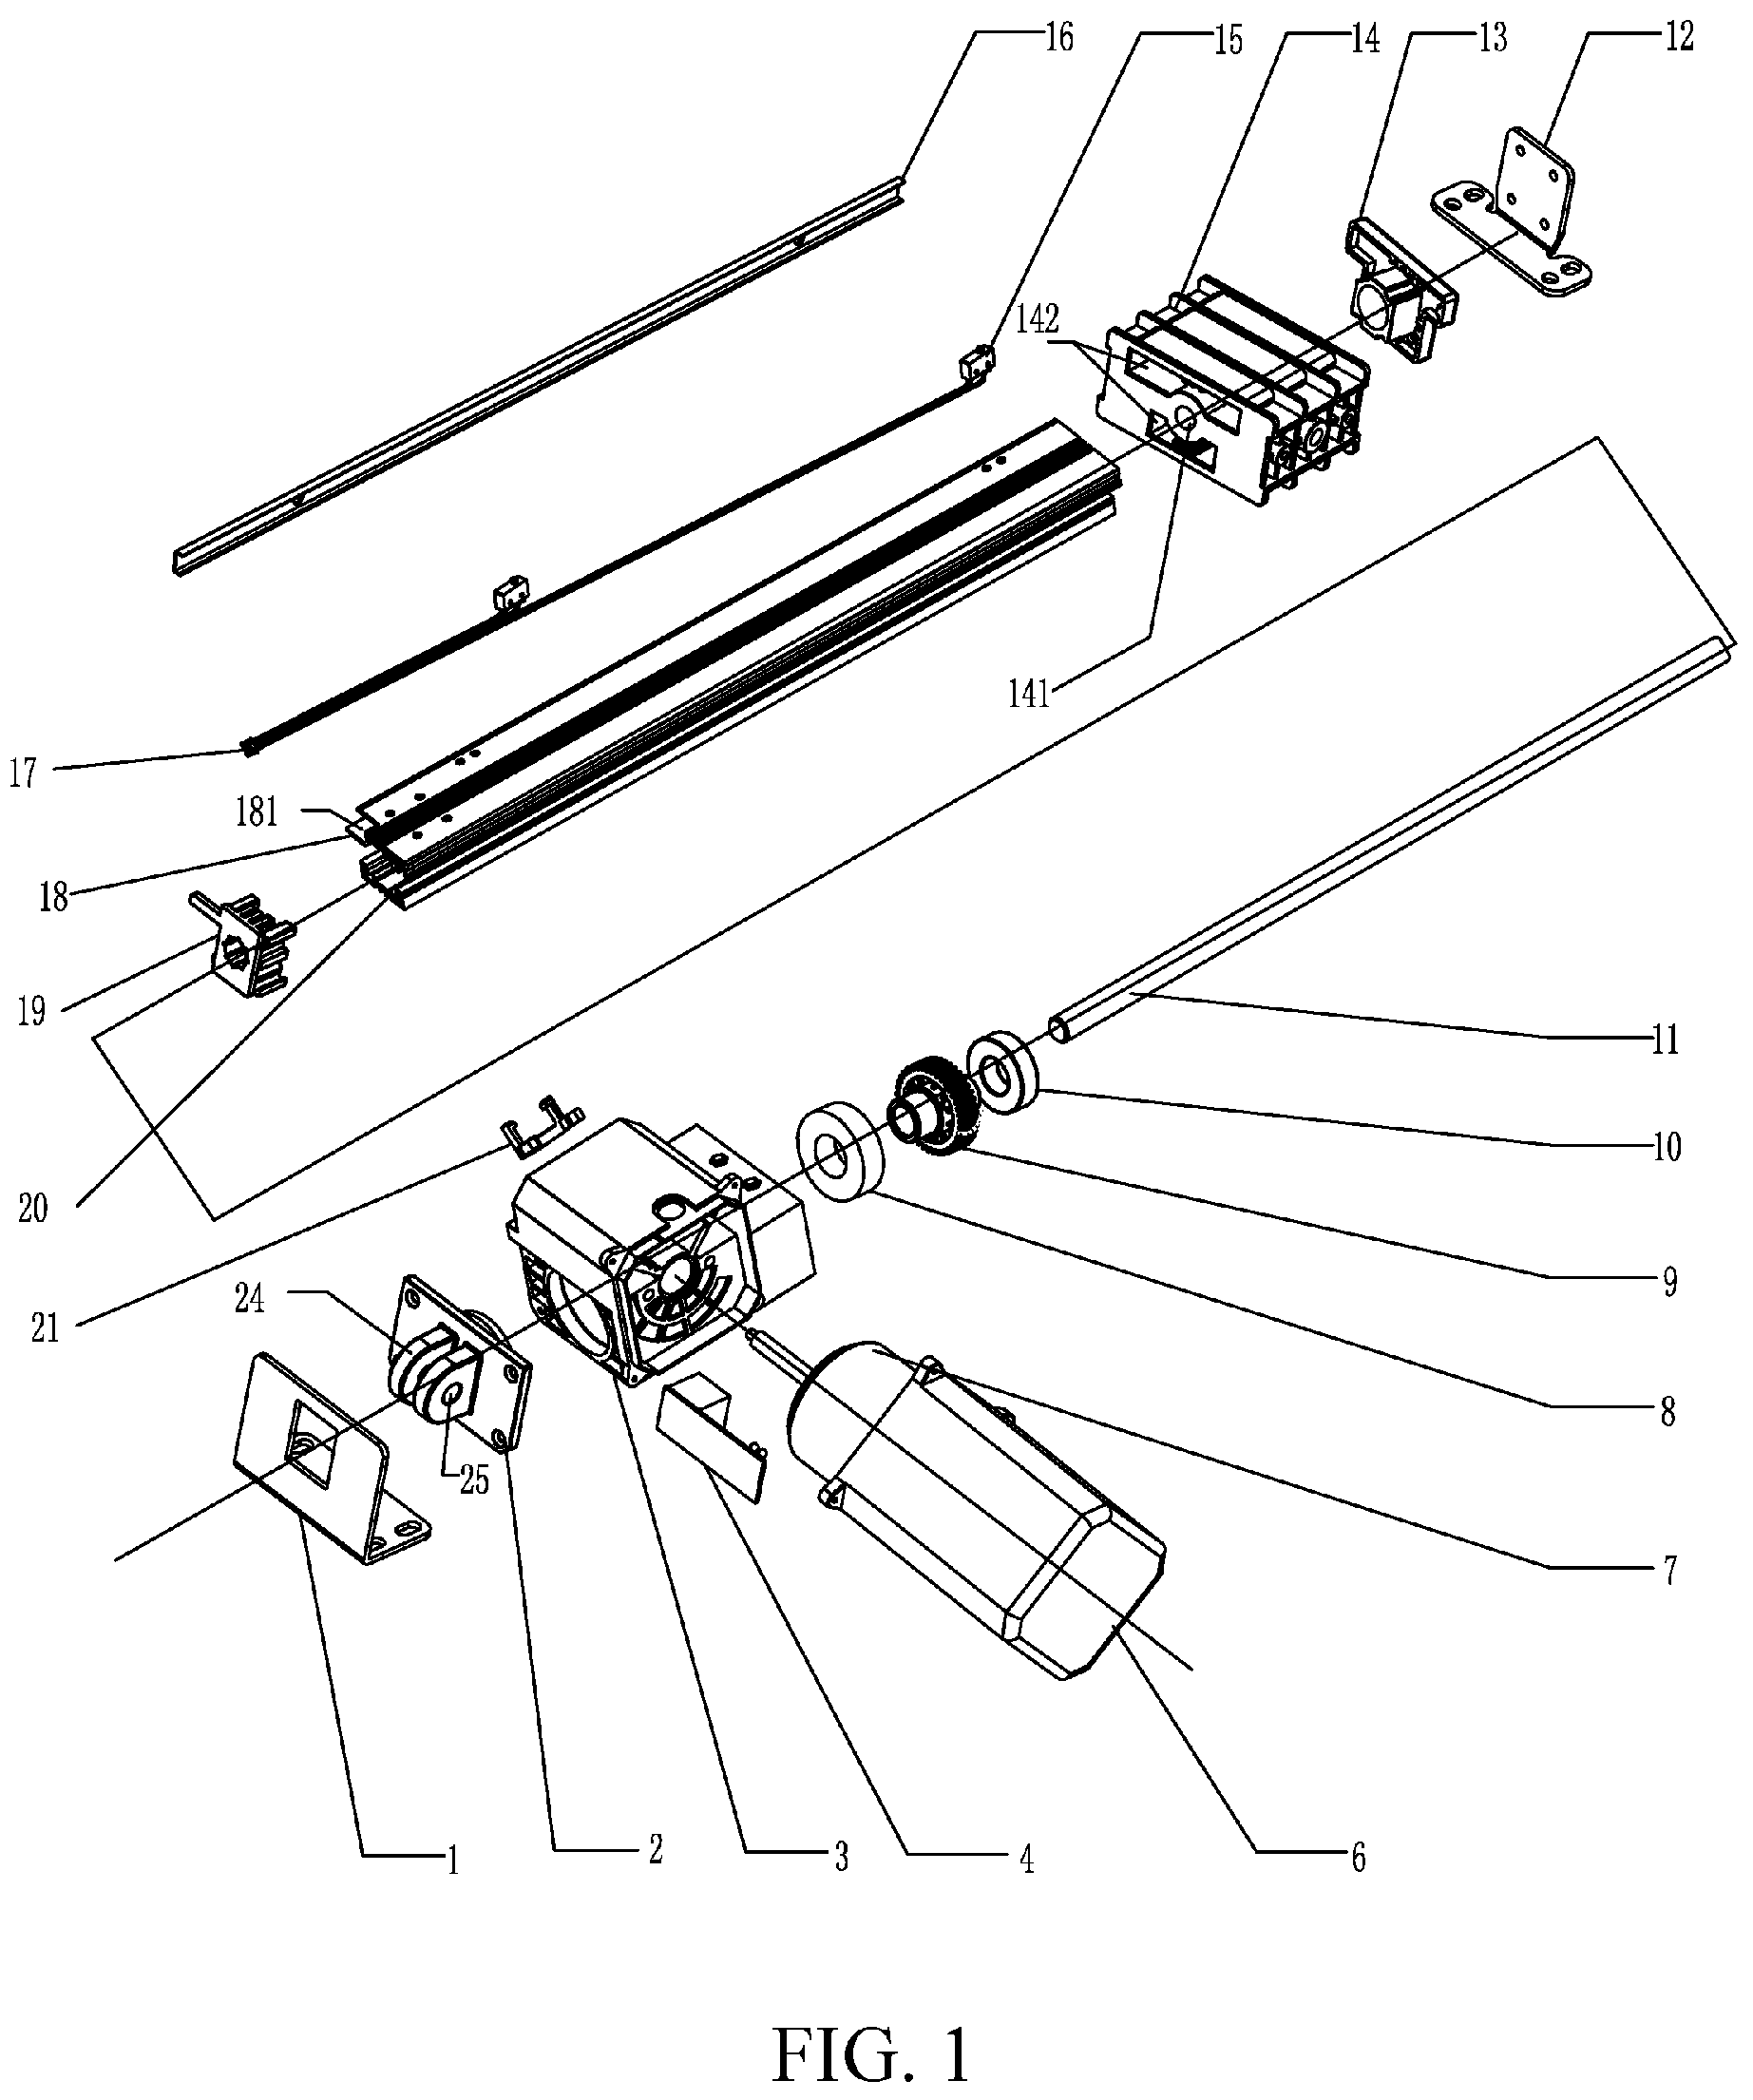 Drive for adjusting parts of seating and reclining furniture